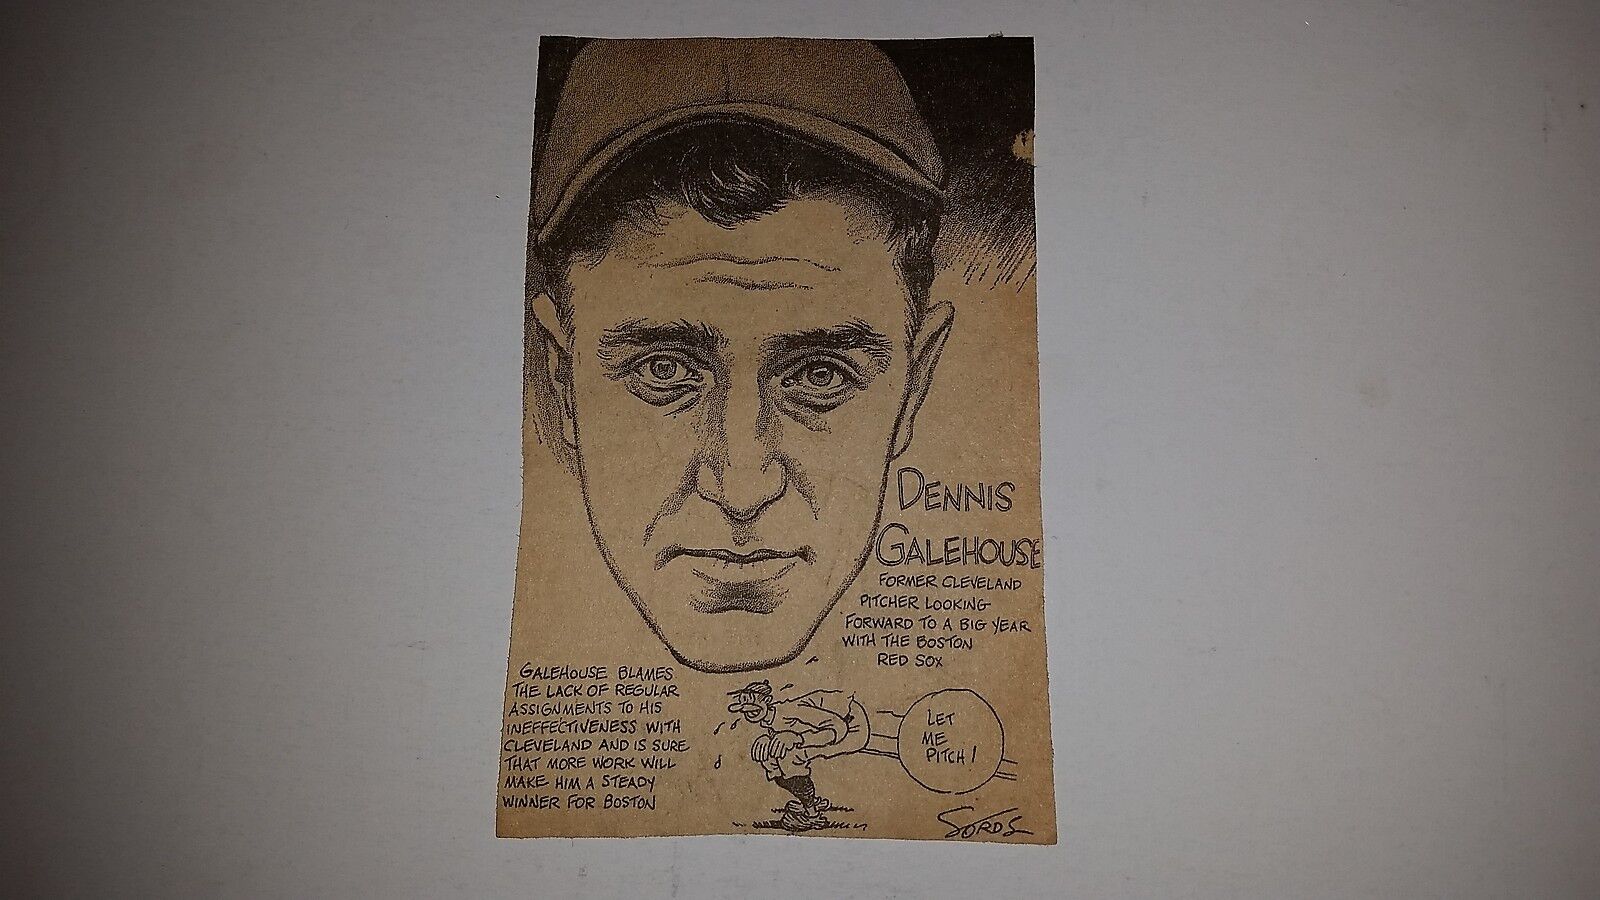 Denny Galehouse Indians 1938 Cartoon Sketch VERY RARE by Jack Sords